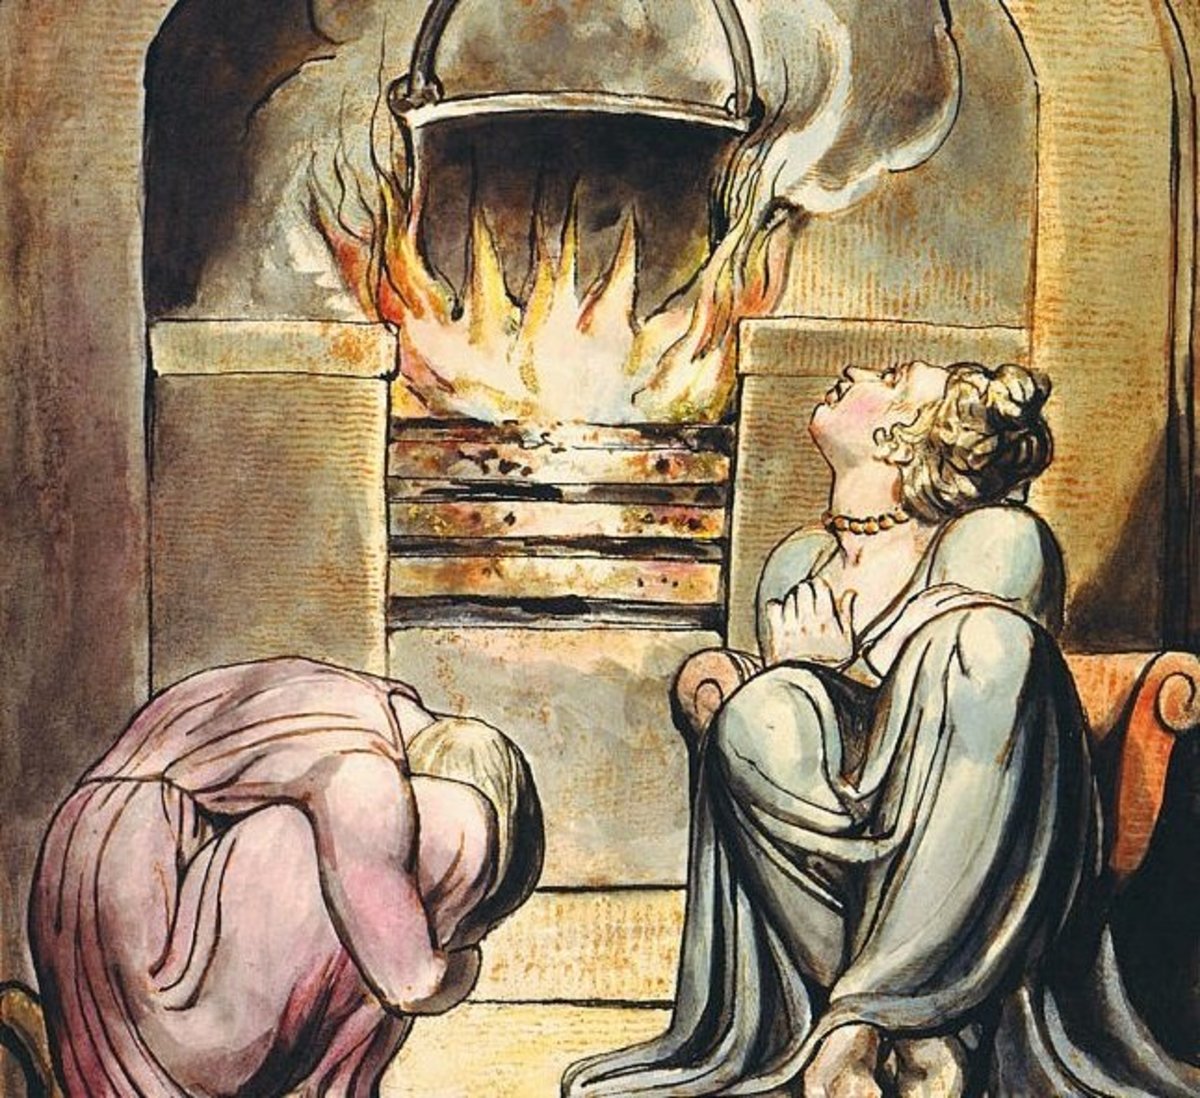 A cauldron over a fire in William Blake's illustrations to his mythical "Europe, a Prophecy," first published in 1794.